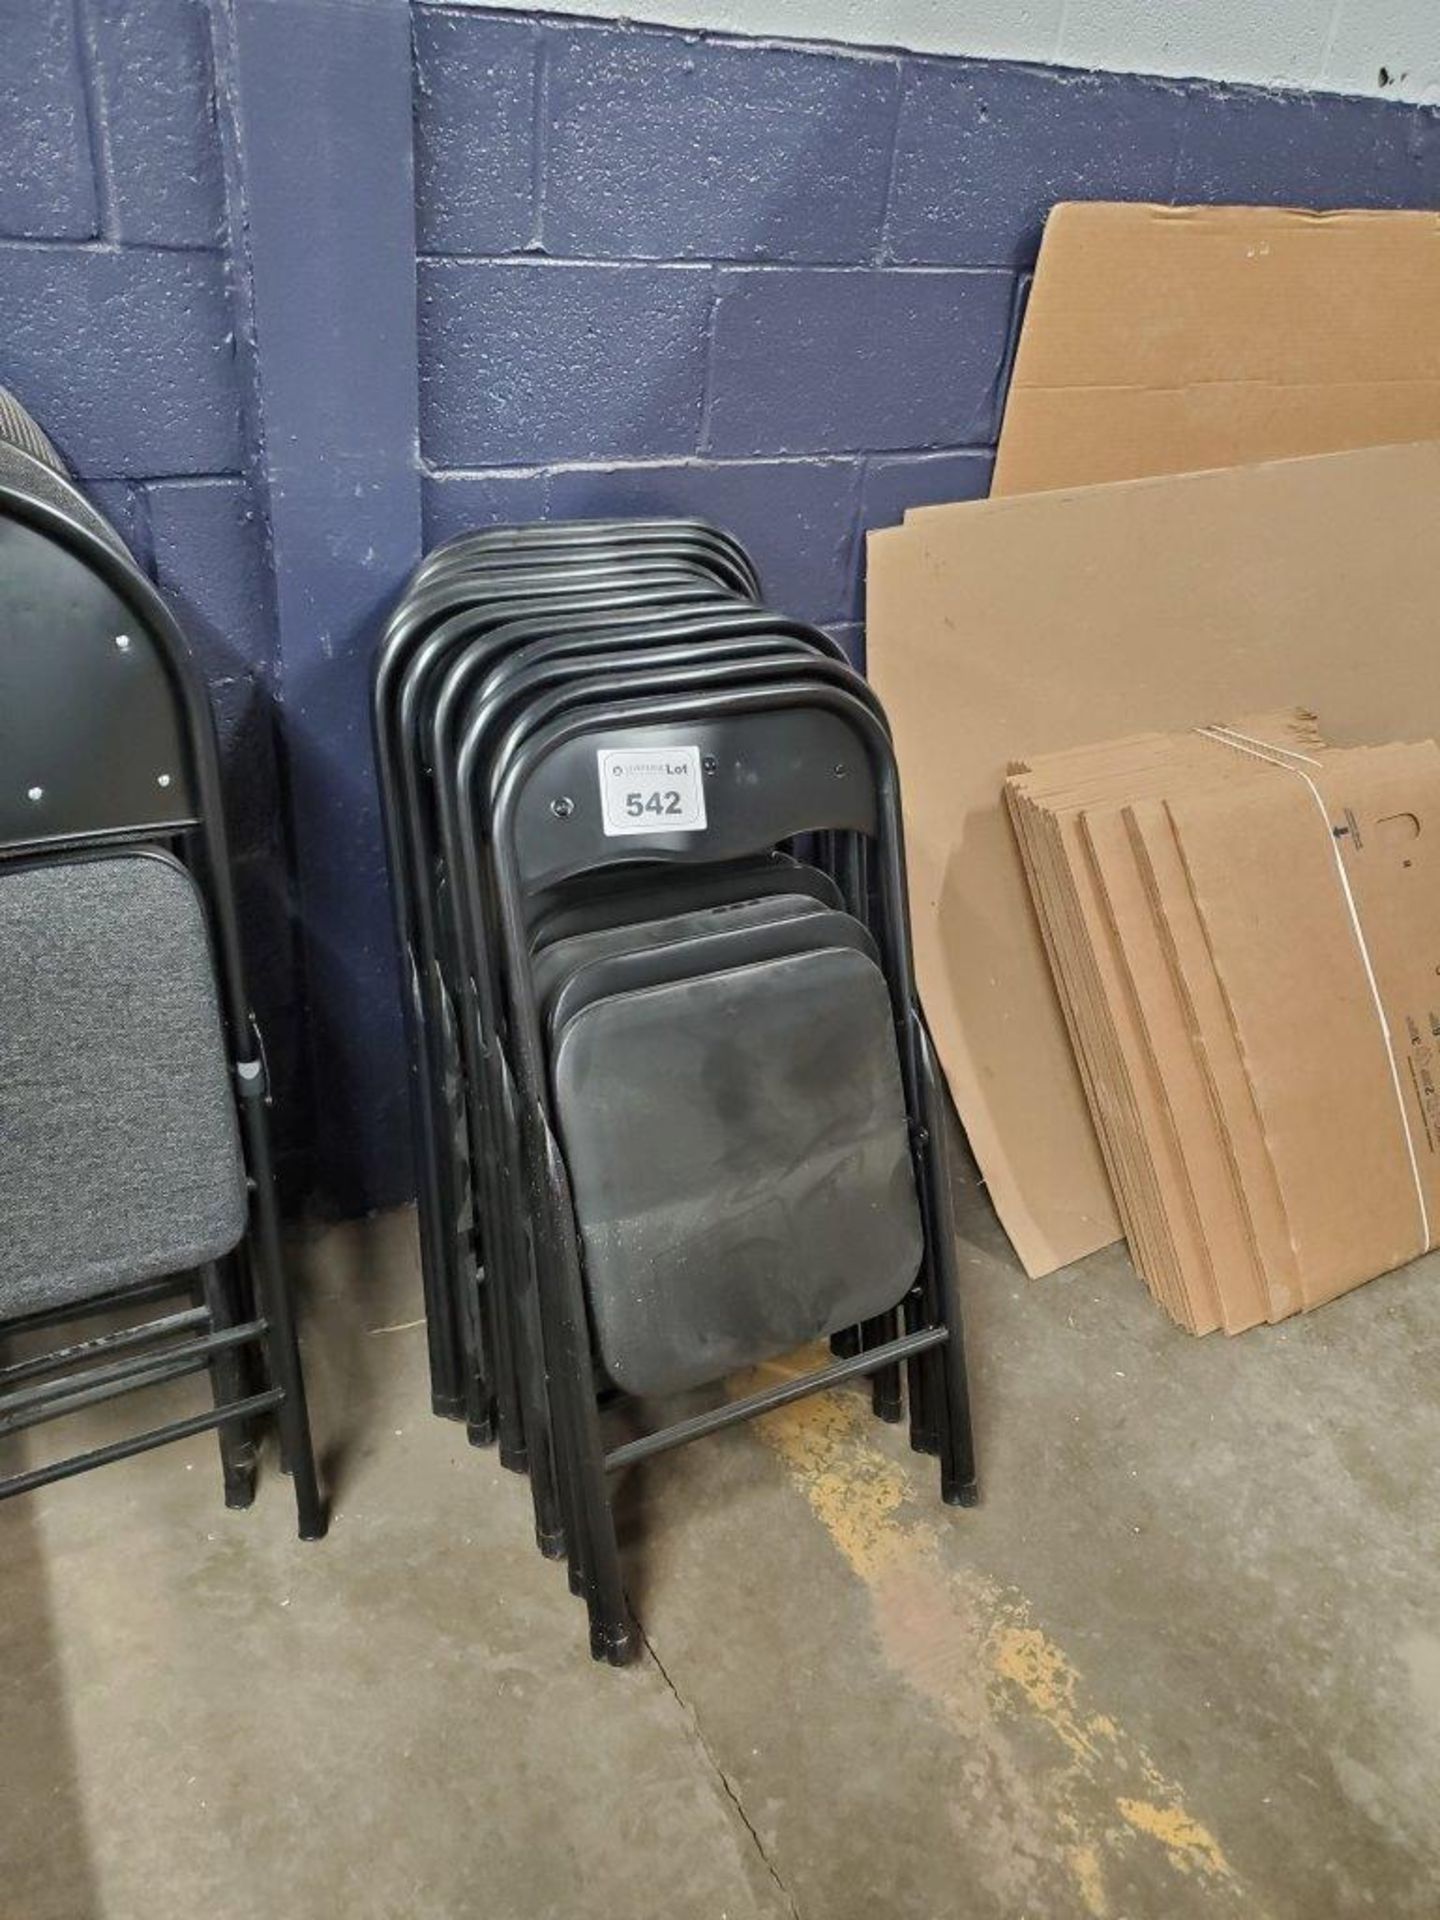 Qty of 11 Folding Chairs